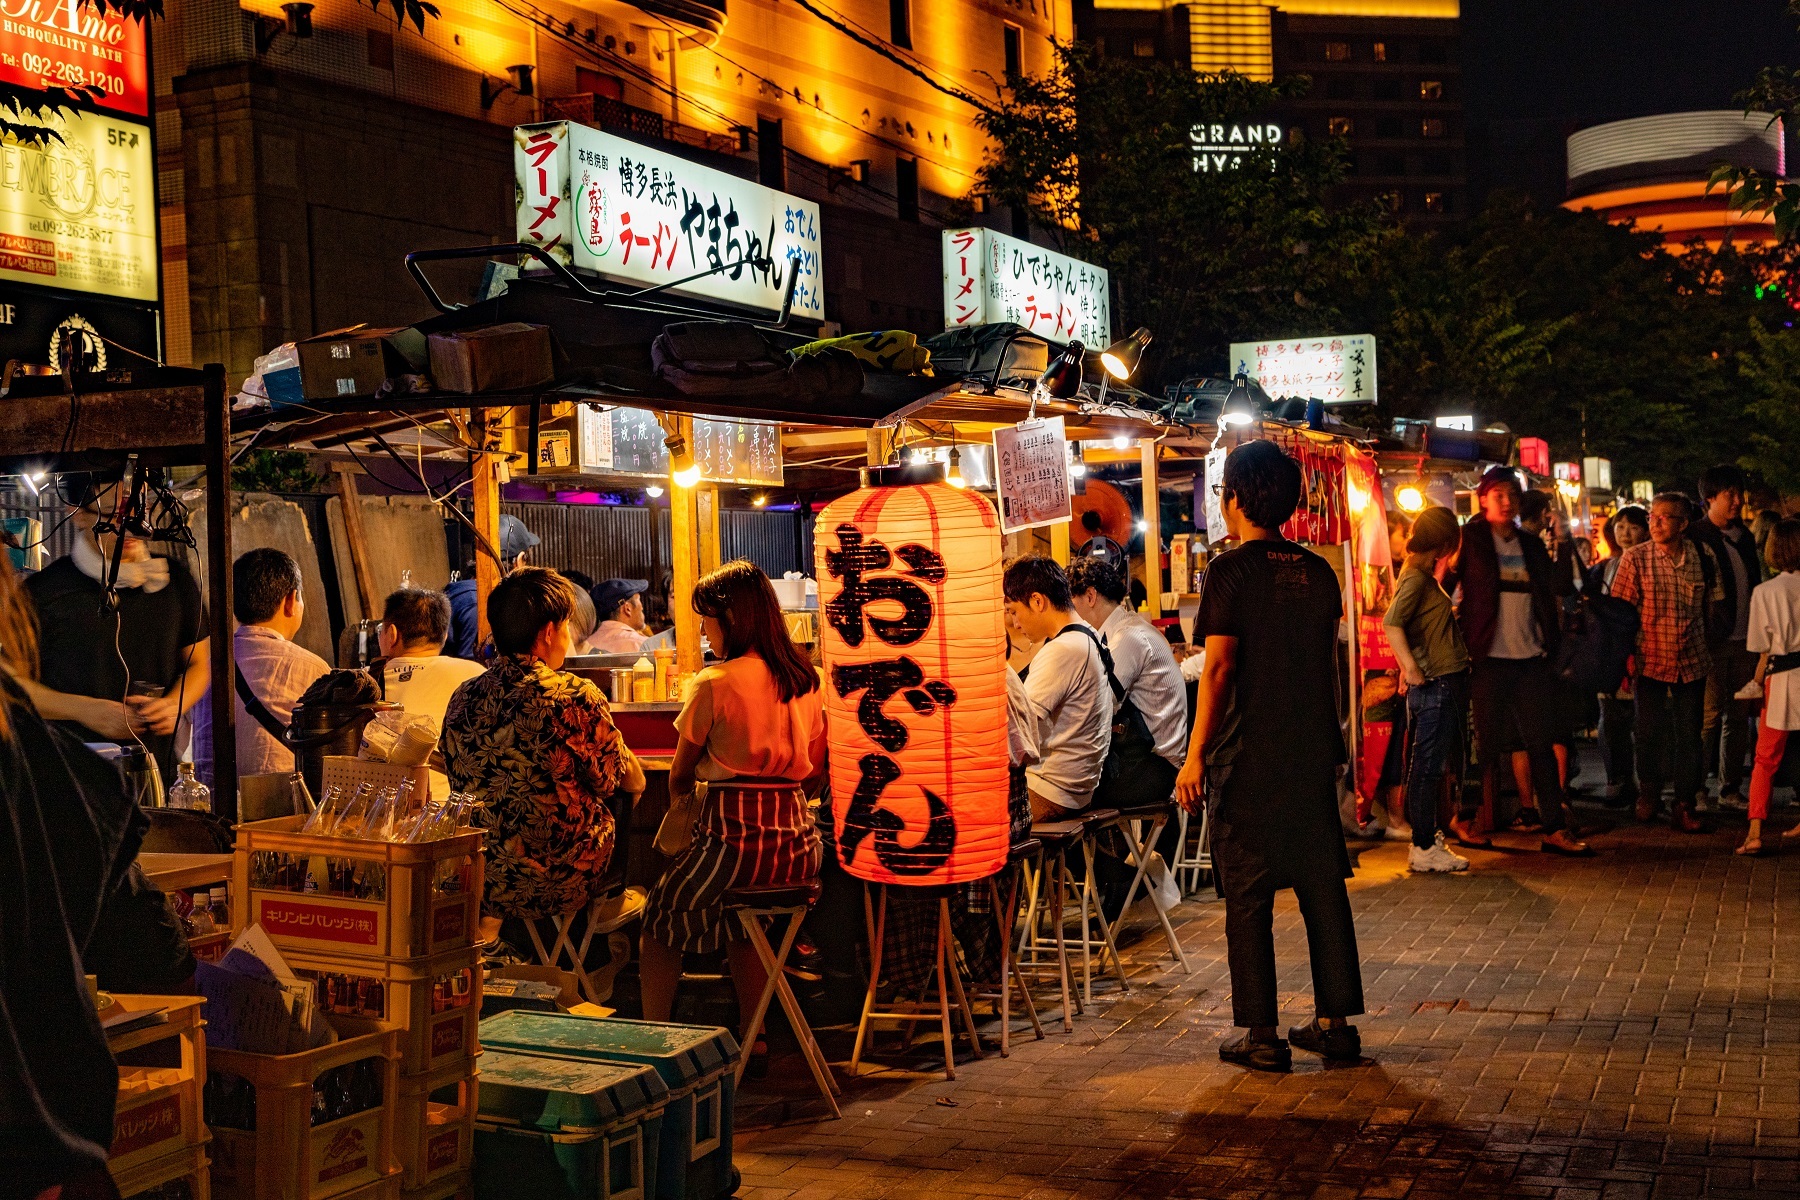 <p>Excellent and inexpensive street food can be found in almost every city in Japan. However, the delicacies served at the stalls in <a href="https://www.japan.travel/en/destinations/kyushu/fukuoka/fukuoka-city/">Fukuoka</a>, a port town on the island of Kyushu, are reputed to be some of the best. </p><p>Serving freshly cooked seafood, famously good tonkotsu ramen and much more, the <a href="https://www.japan.travel/en/spot/273/"><em>yatai</em></a> (or food stalls) are a fantastic place to get a bite to eat, chat with locals and experience the charm of this relaxed city.</p>